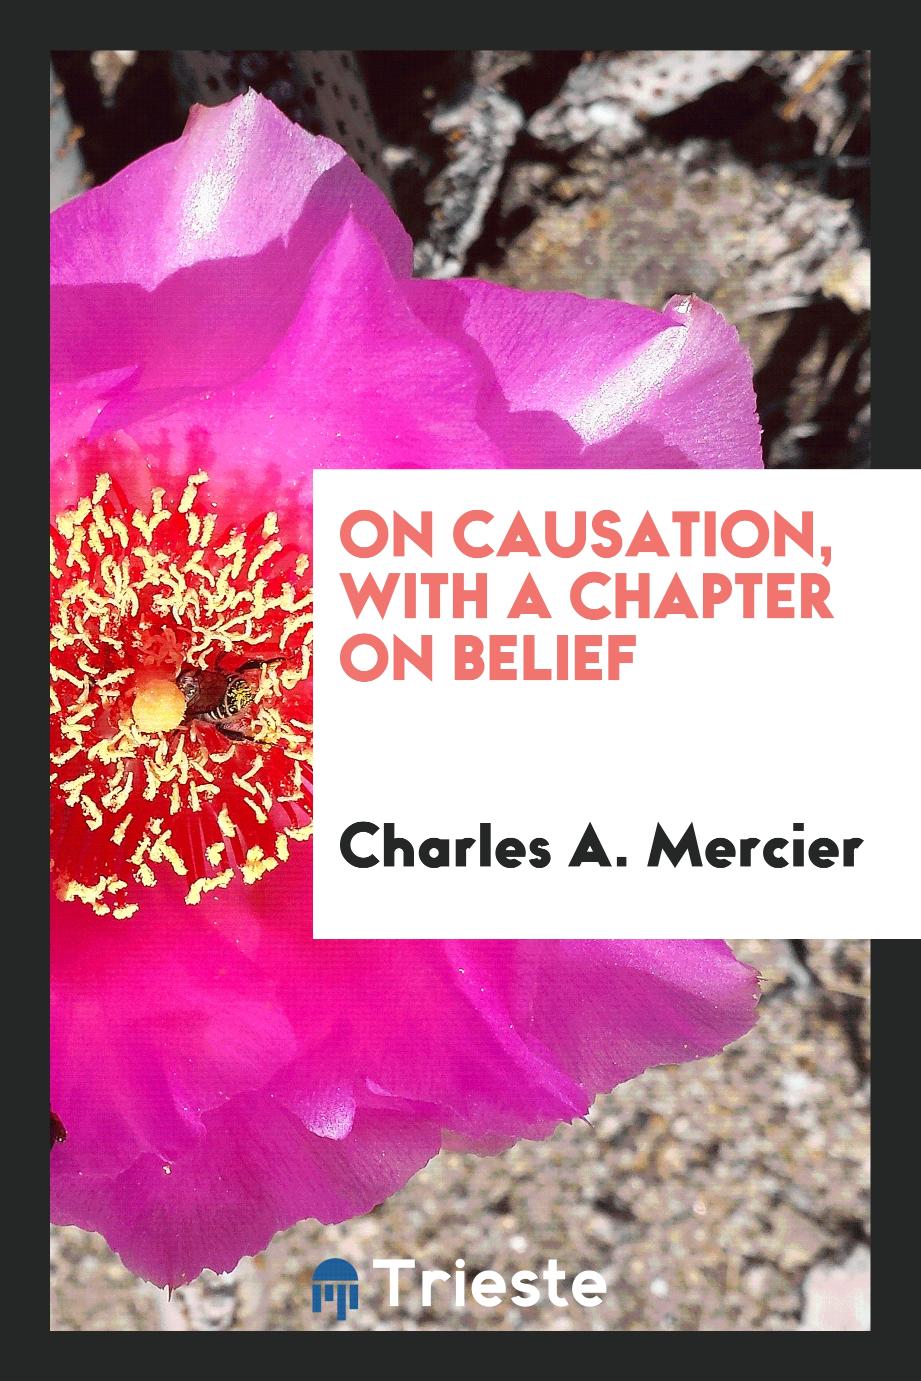 On causation, with a chapter on belief